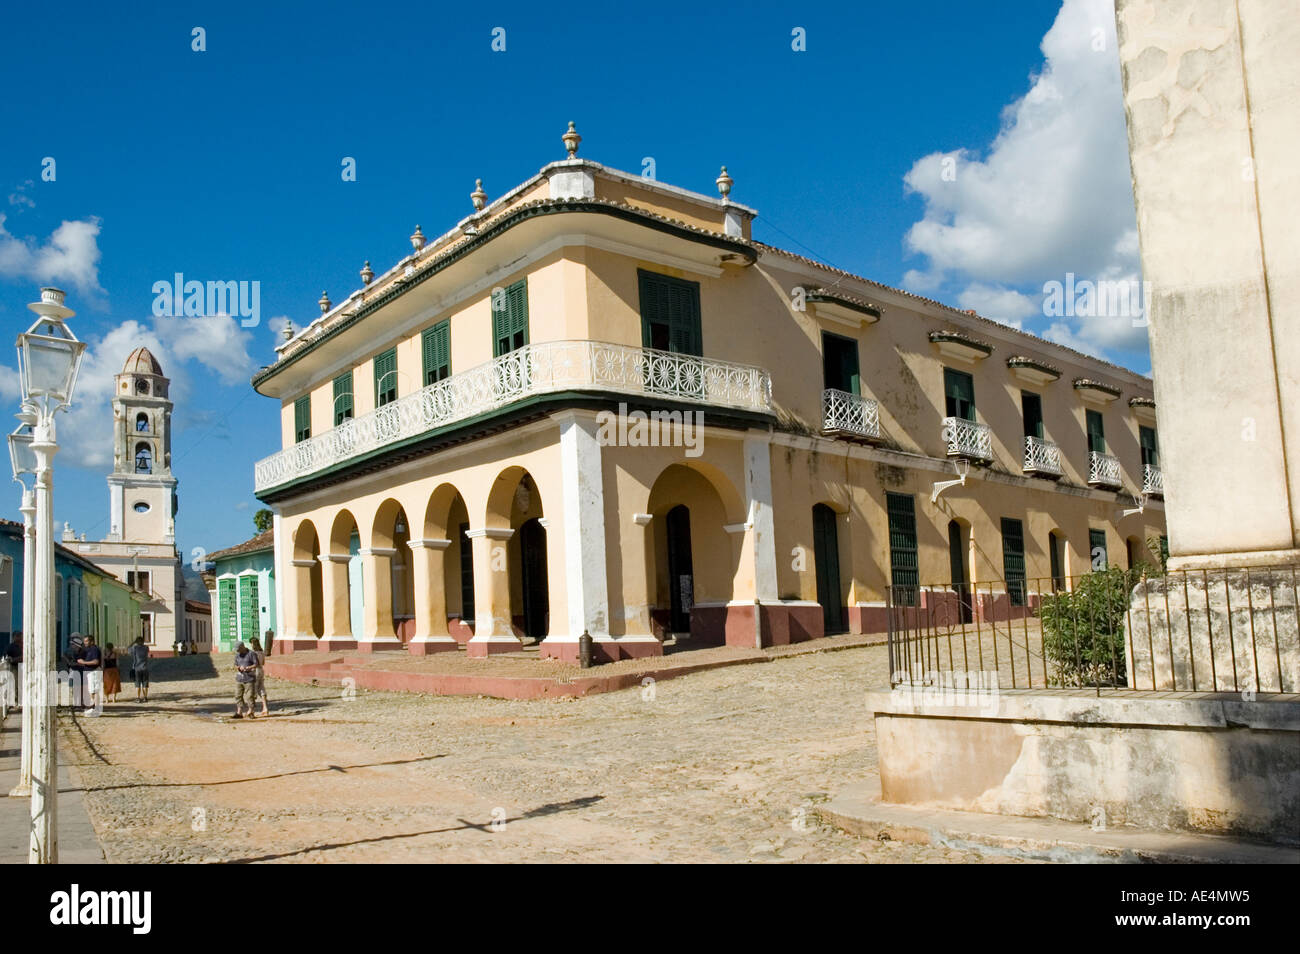 The Palacio Brunet, now the Museo Romantico, is a two-storey mansion in warm yellow stucco on Plaza Mayor in Trinidad de Cuba. Stock Photo